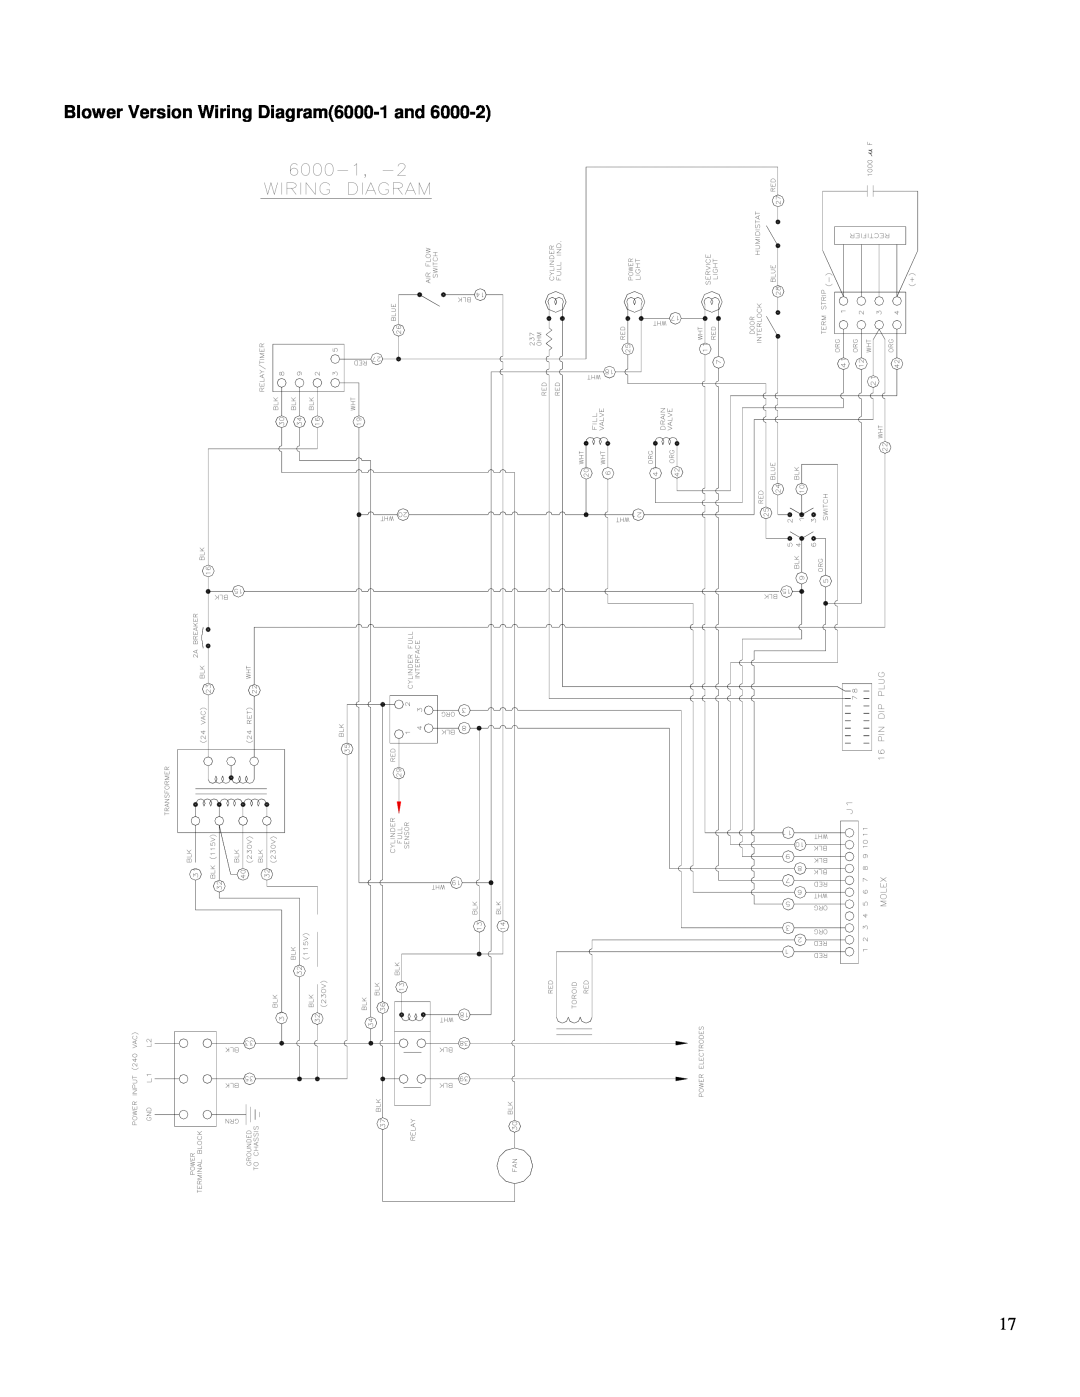 Herrmidifier Co owner manual Blower Version Wiring Diagram6000-1and 